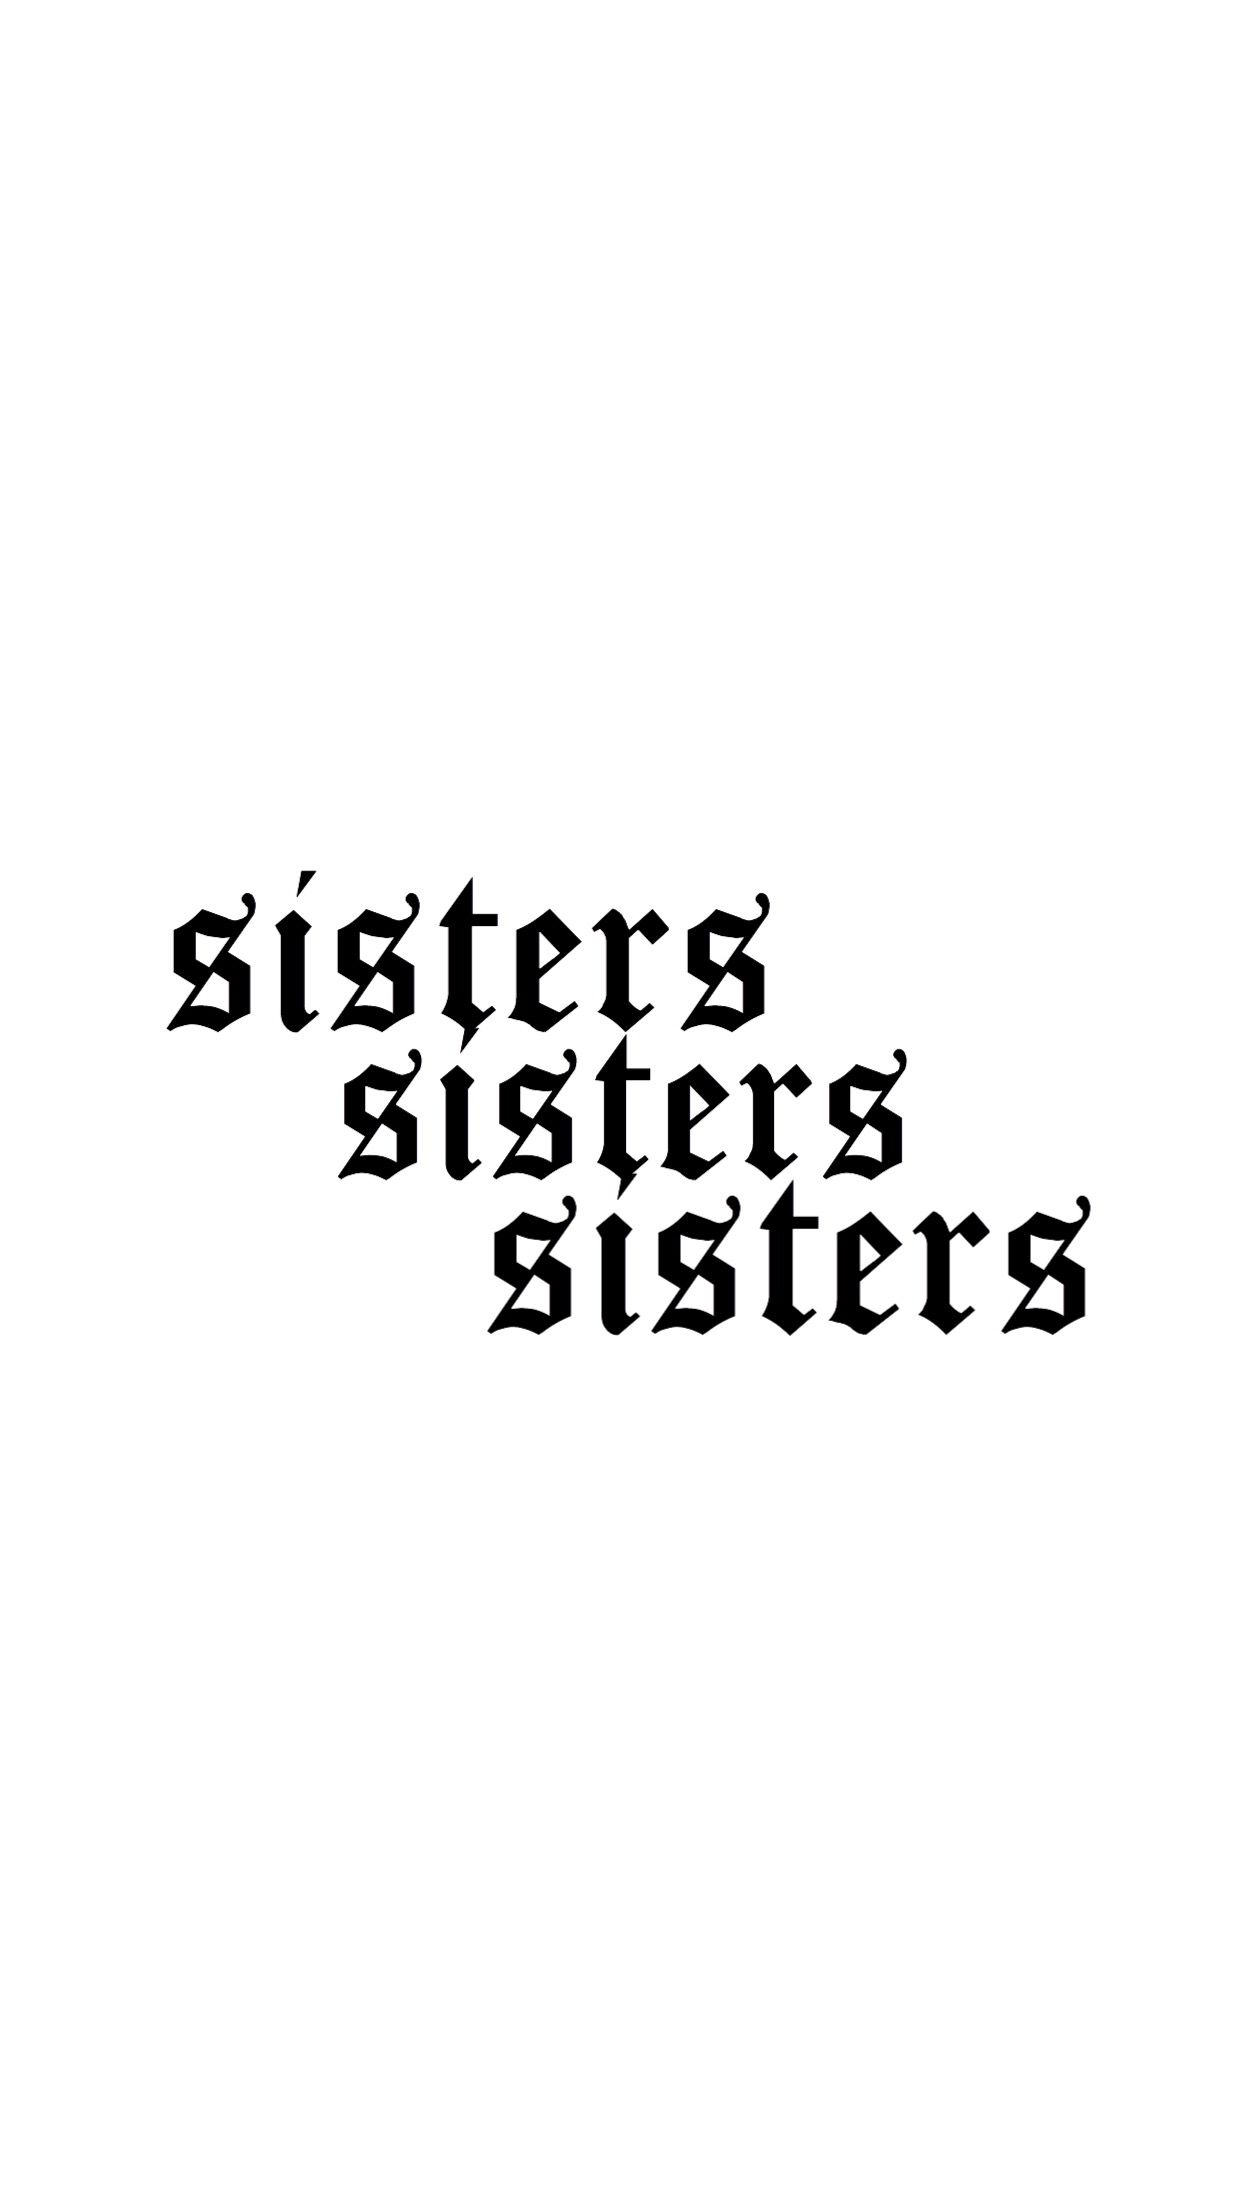 Sister Background Images